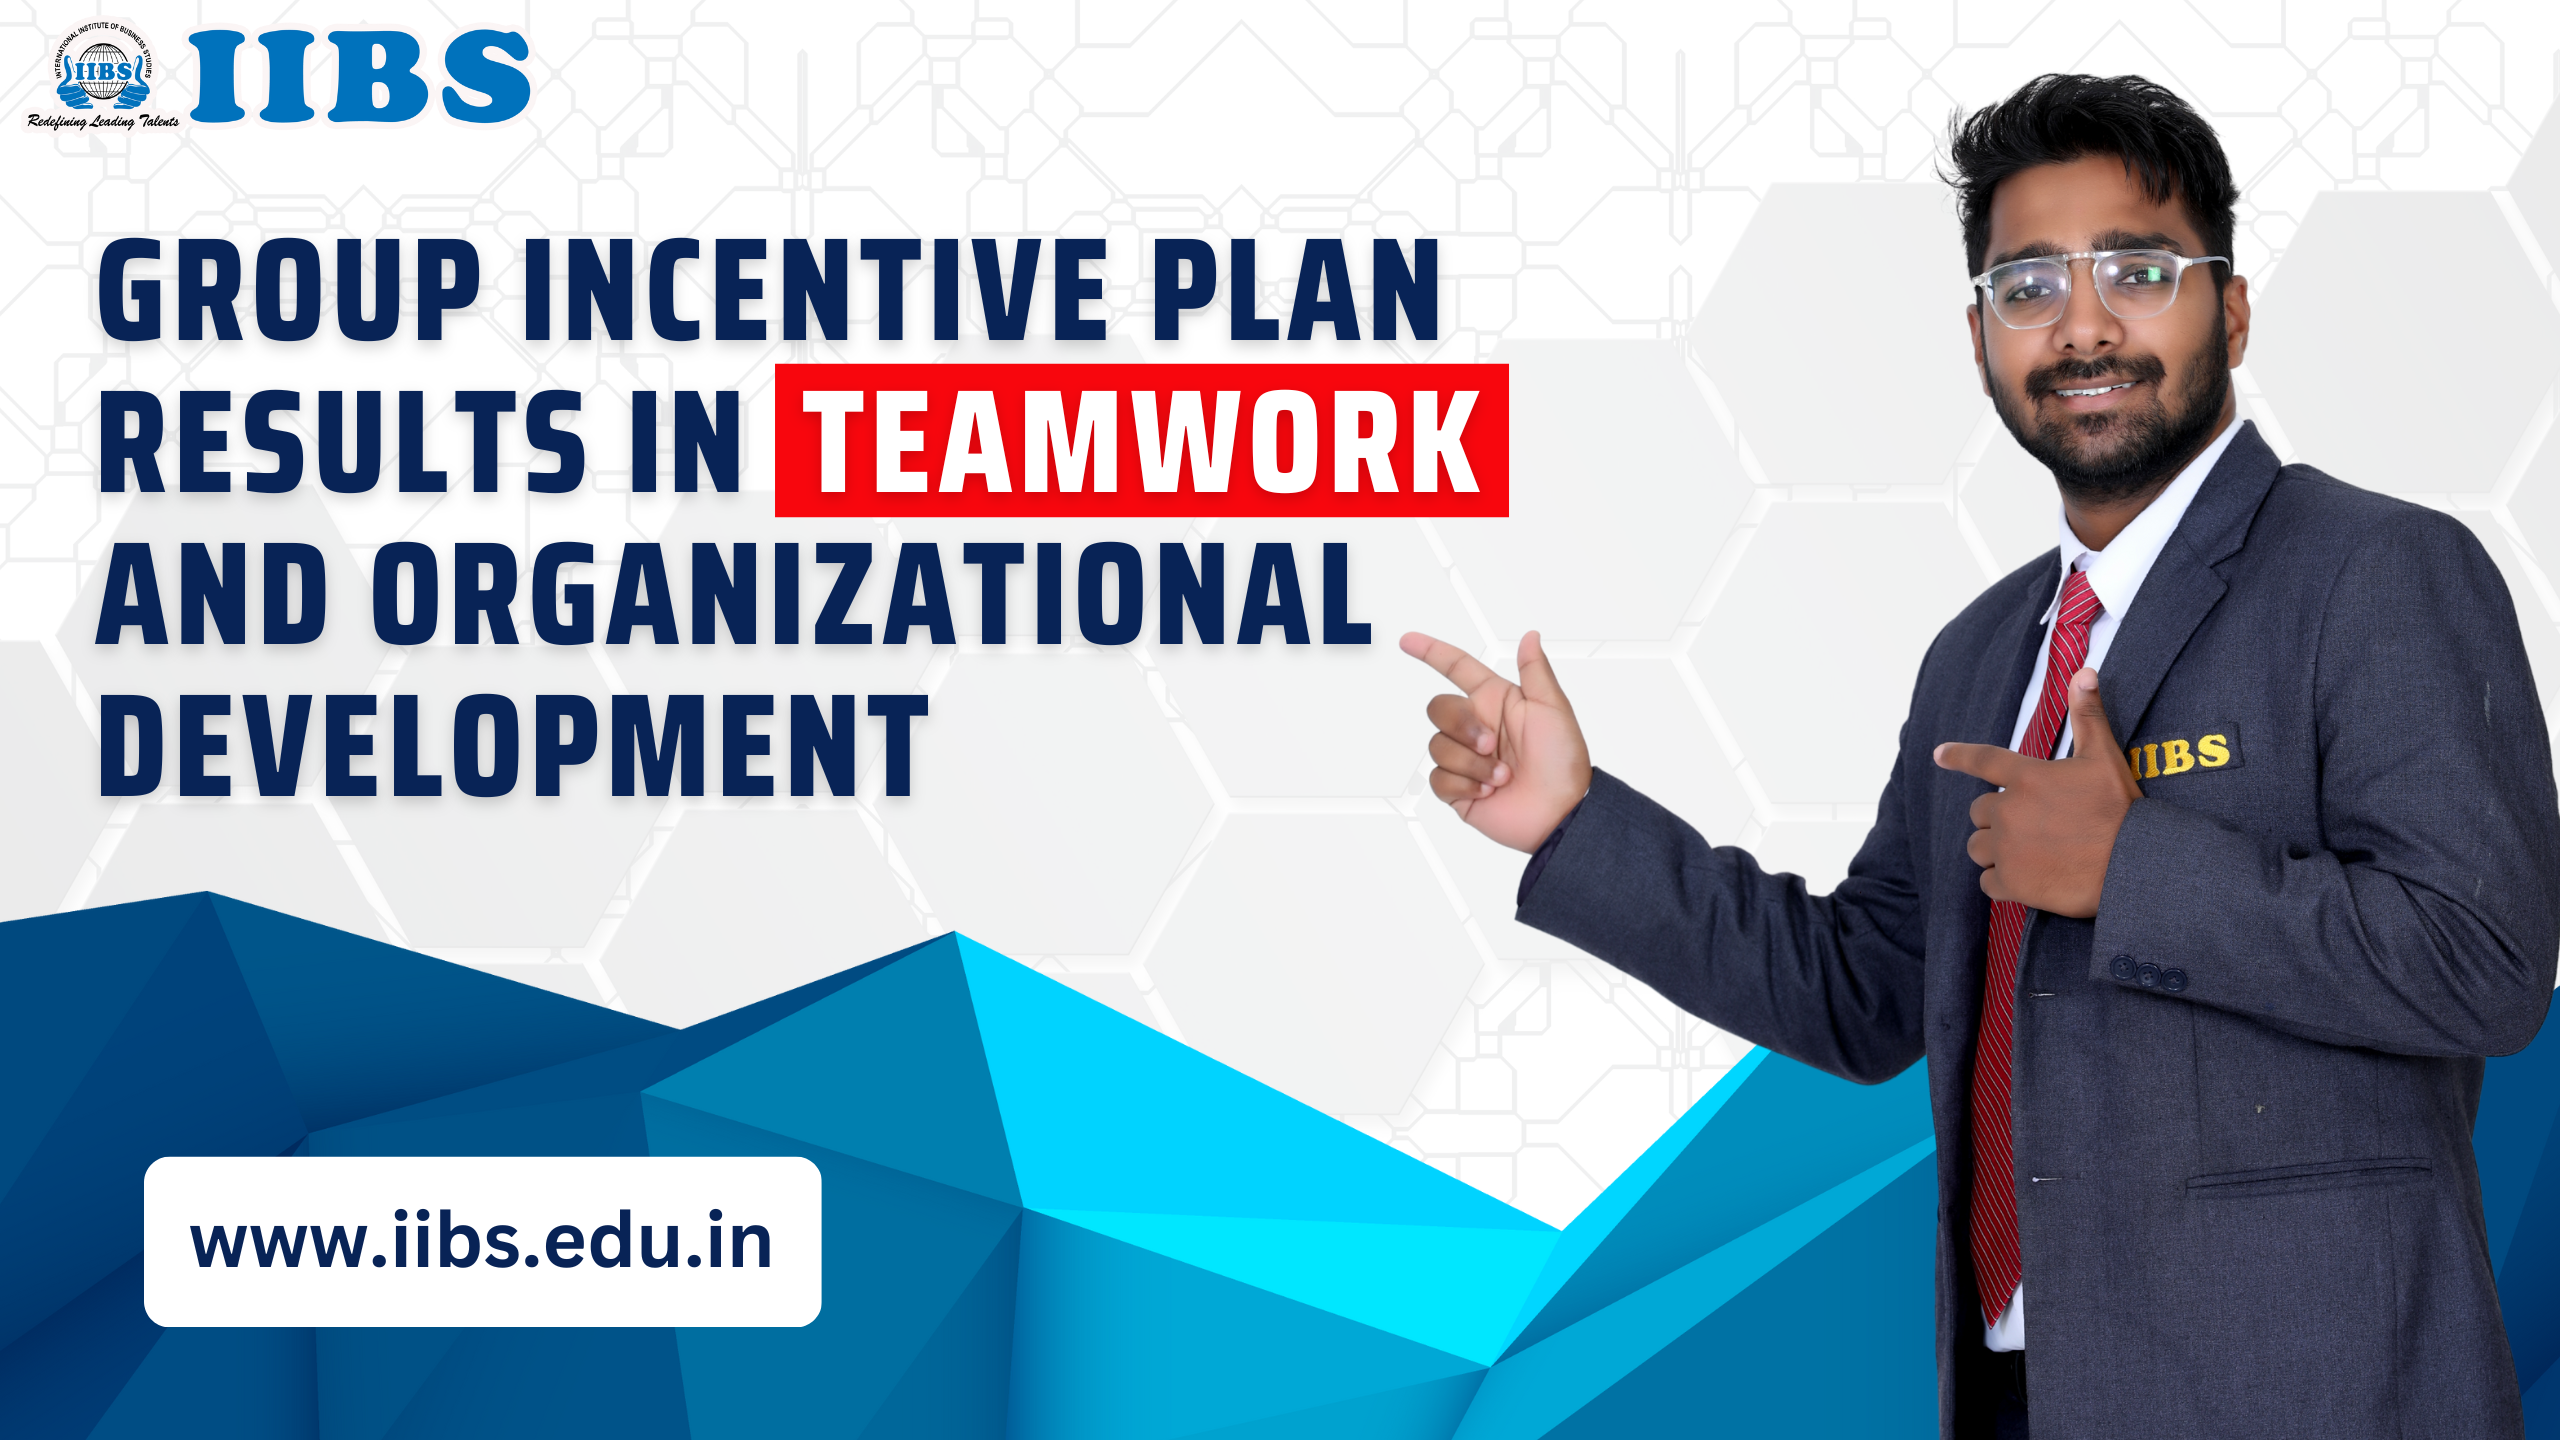 Group Incentive Plan Results in Teamwork and Organizational Development